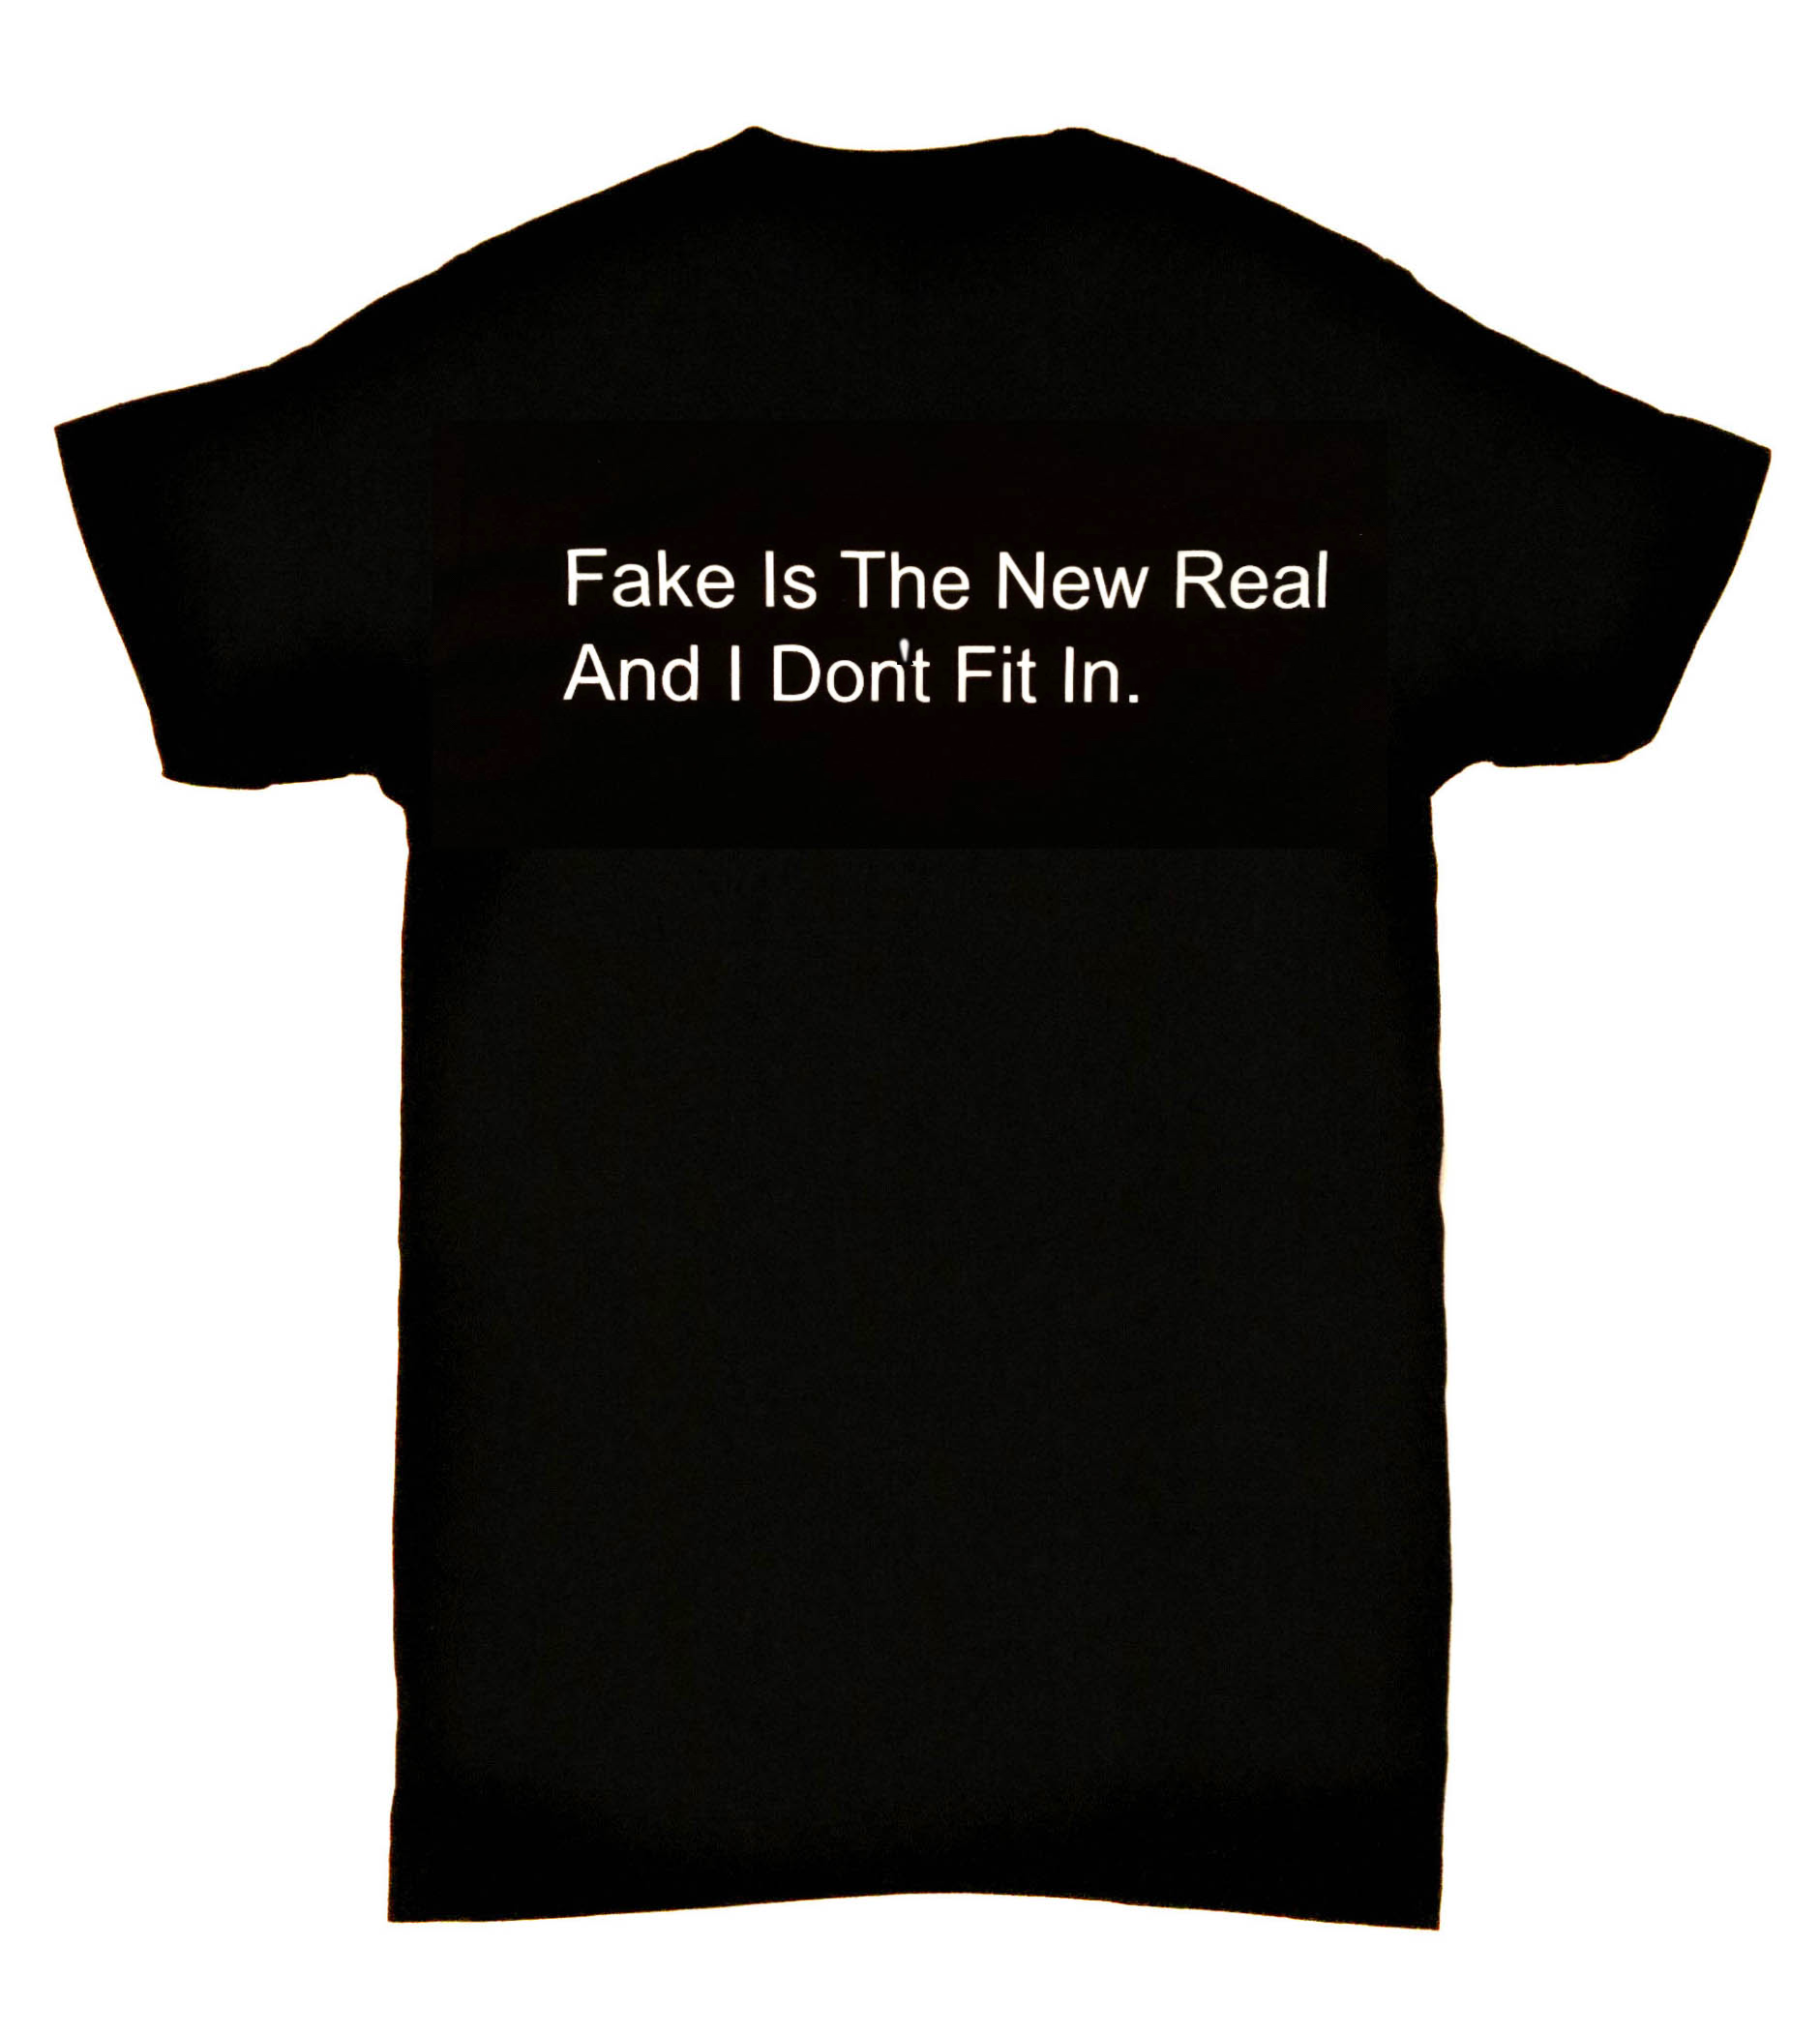 Fake Is The New Real And I Don't Fit In Fake Is The New Real And I Don't Fit In